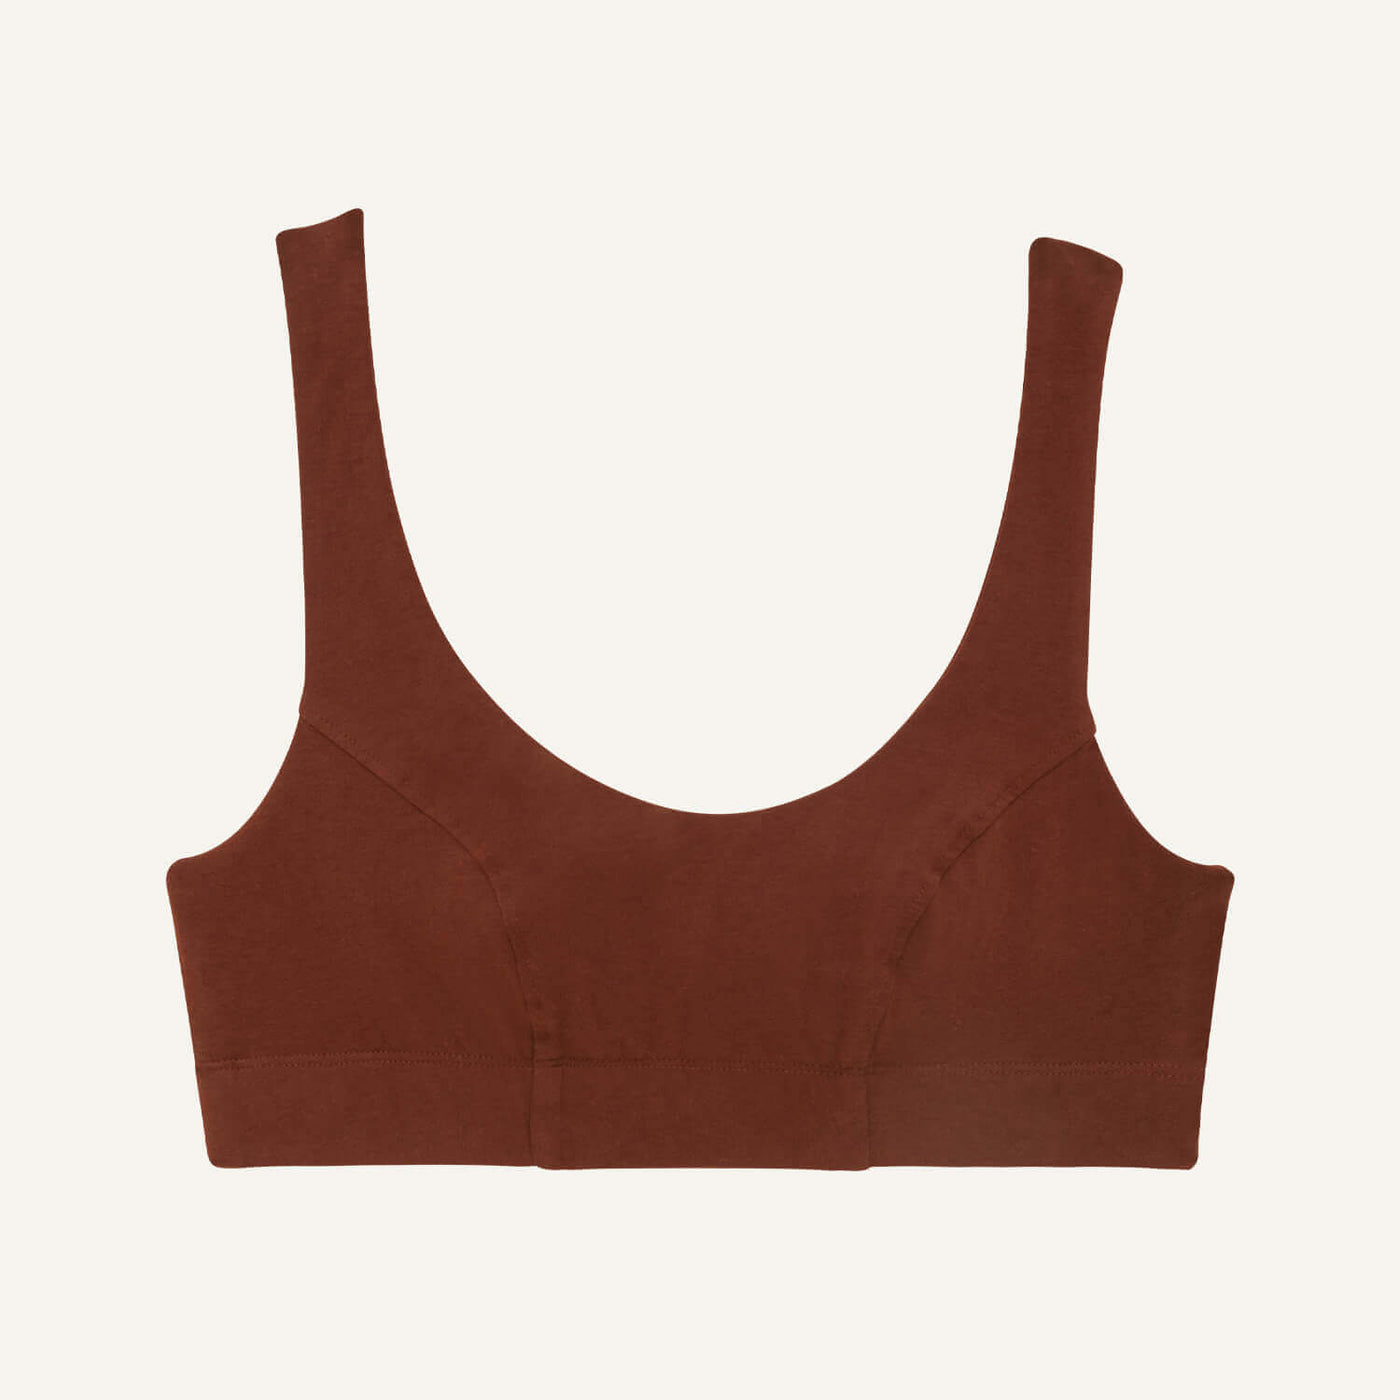 Subset Organic Cotton Scoop Bralette: Available in sizes 2XS-3XL